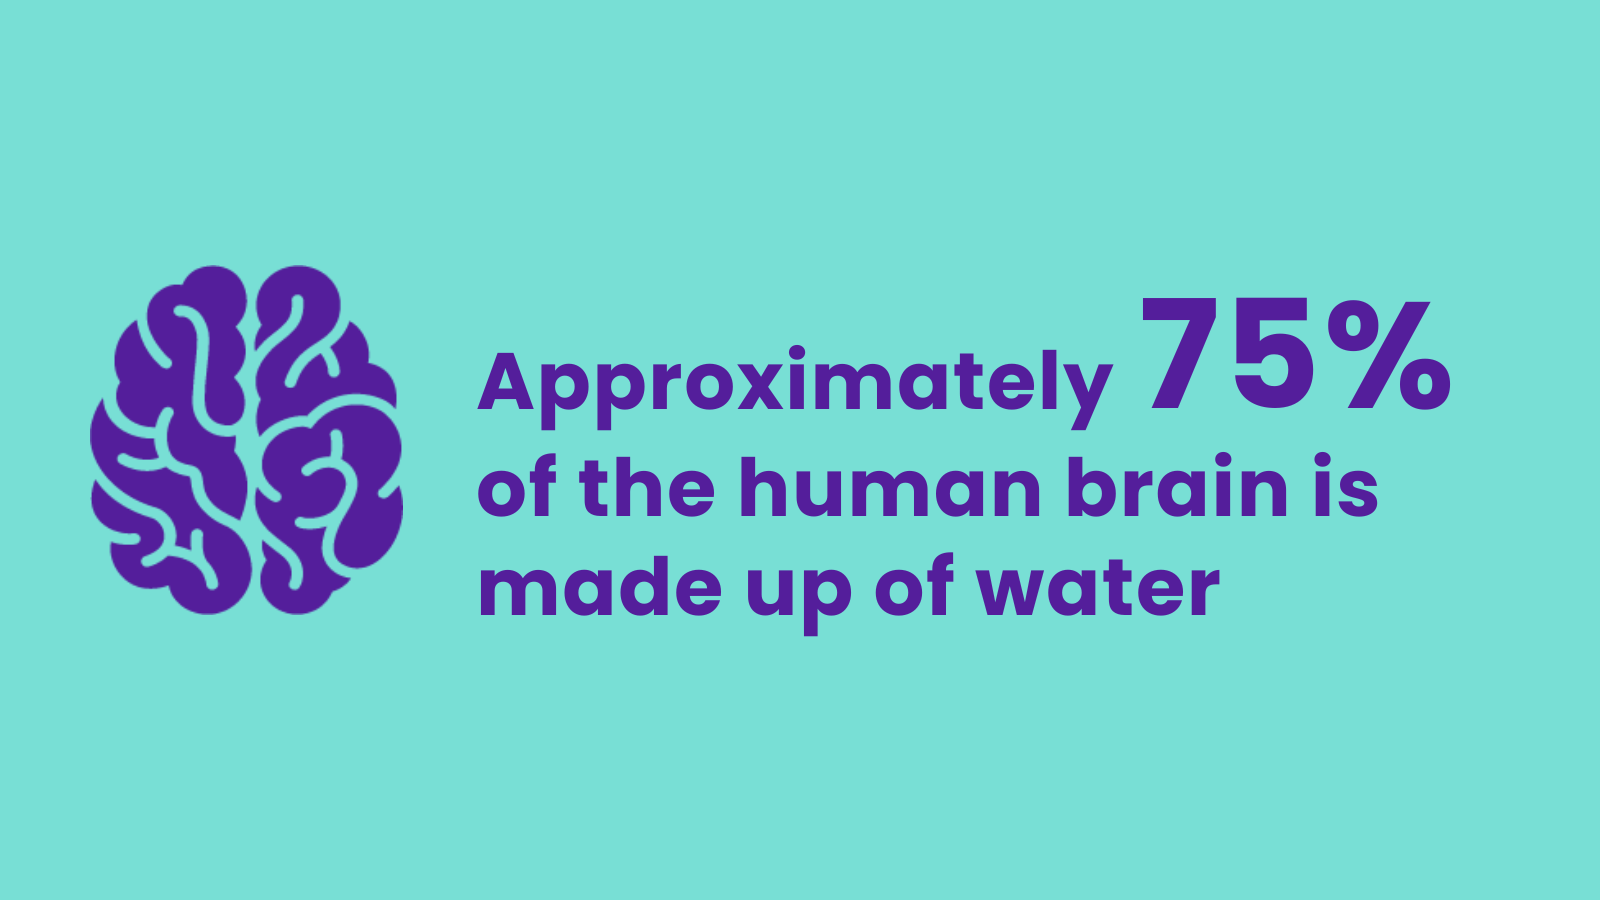 Why hydration is important for healthy brain function